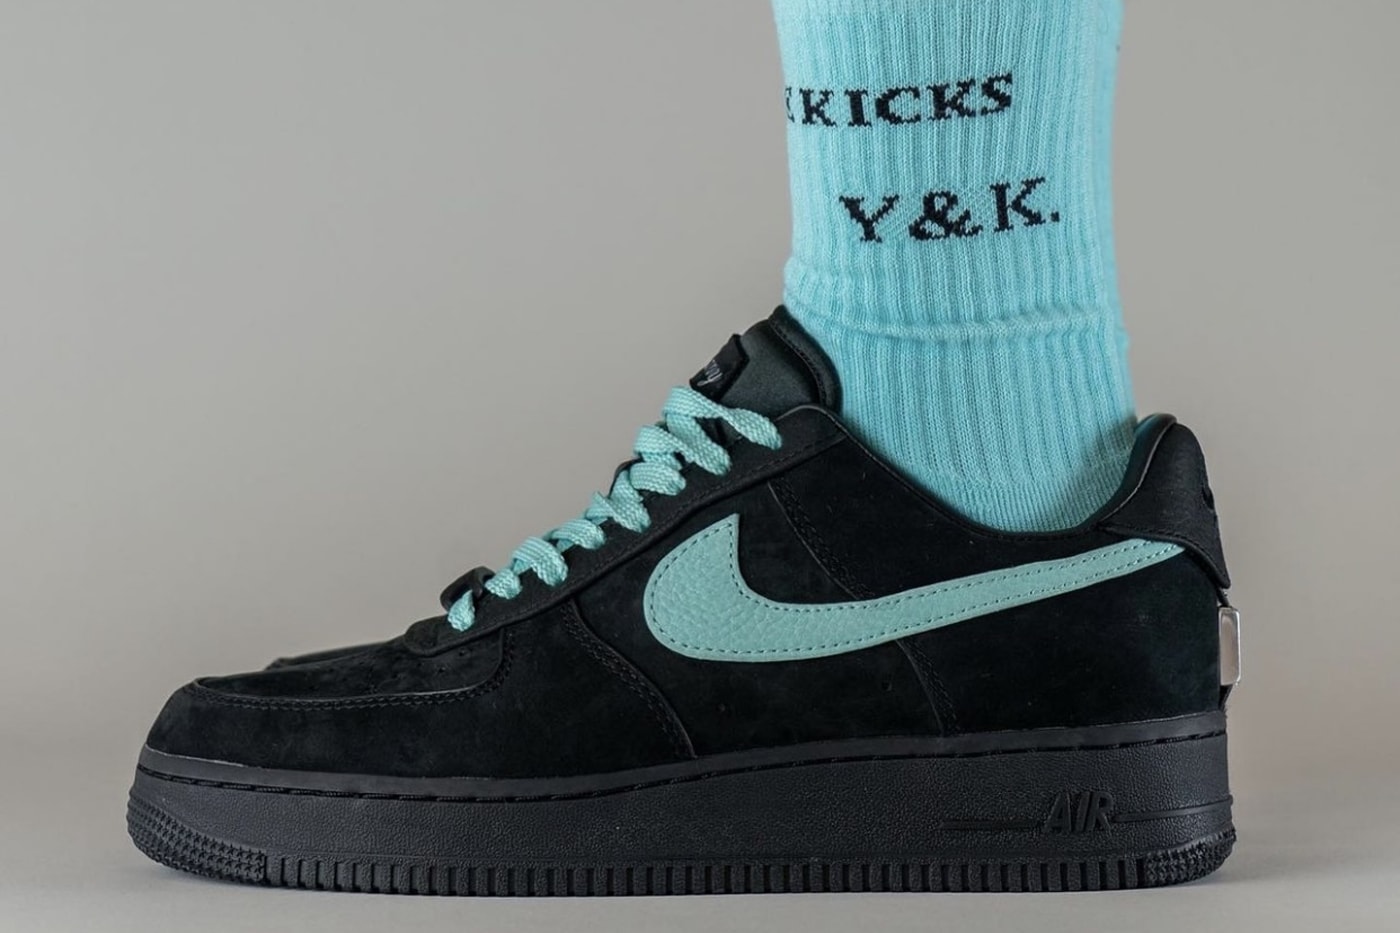 The Best Nike Air Force 1 Sneakers for Every Budget